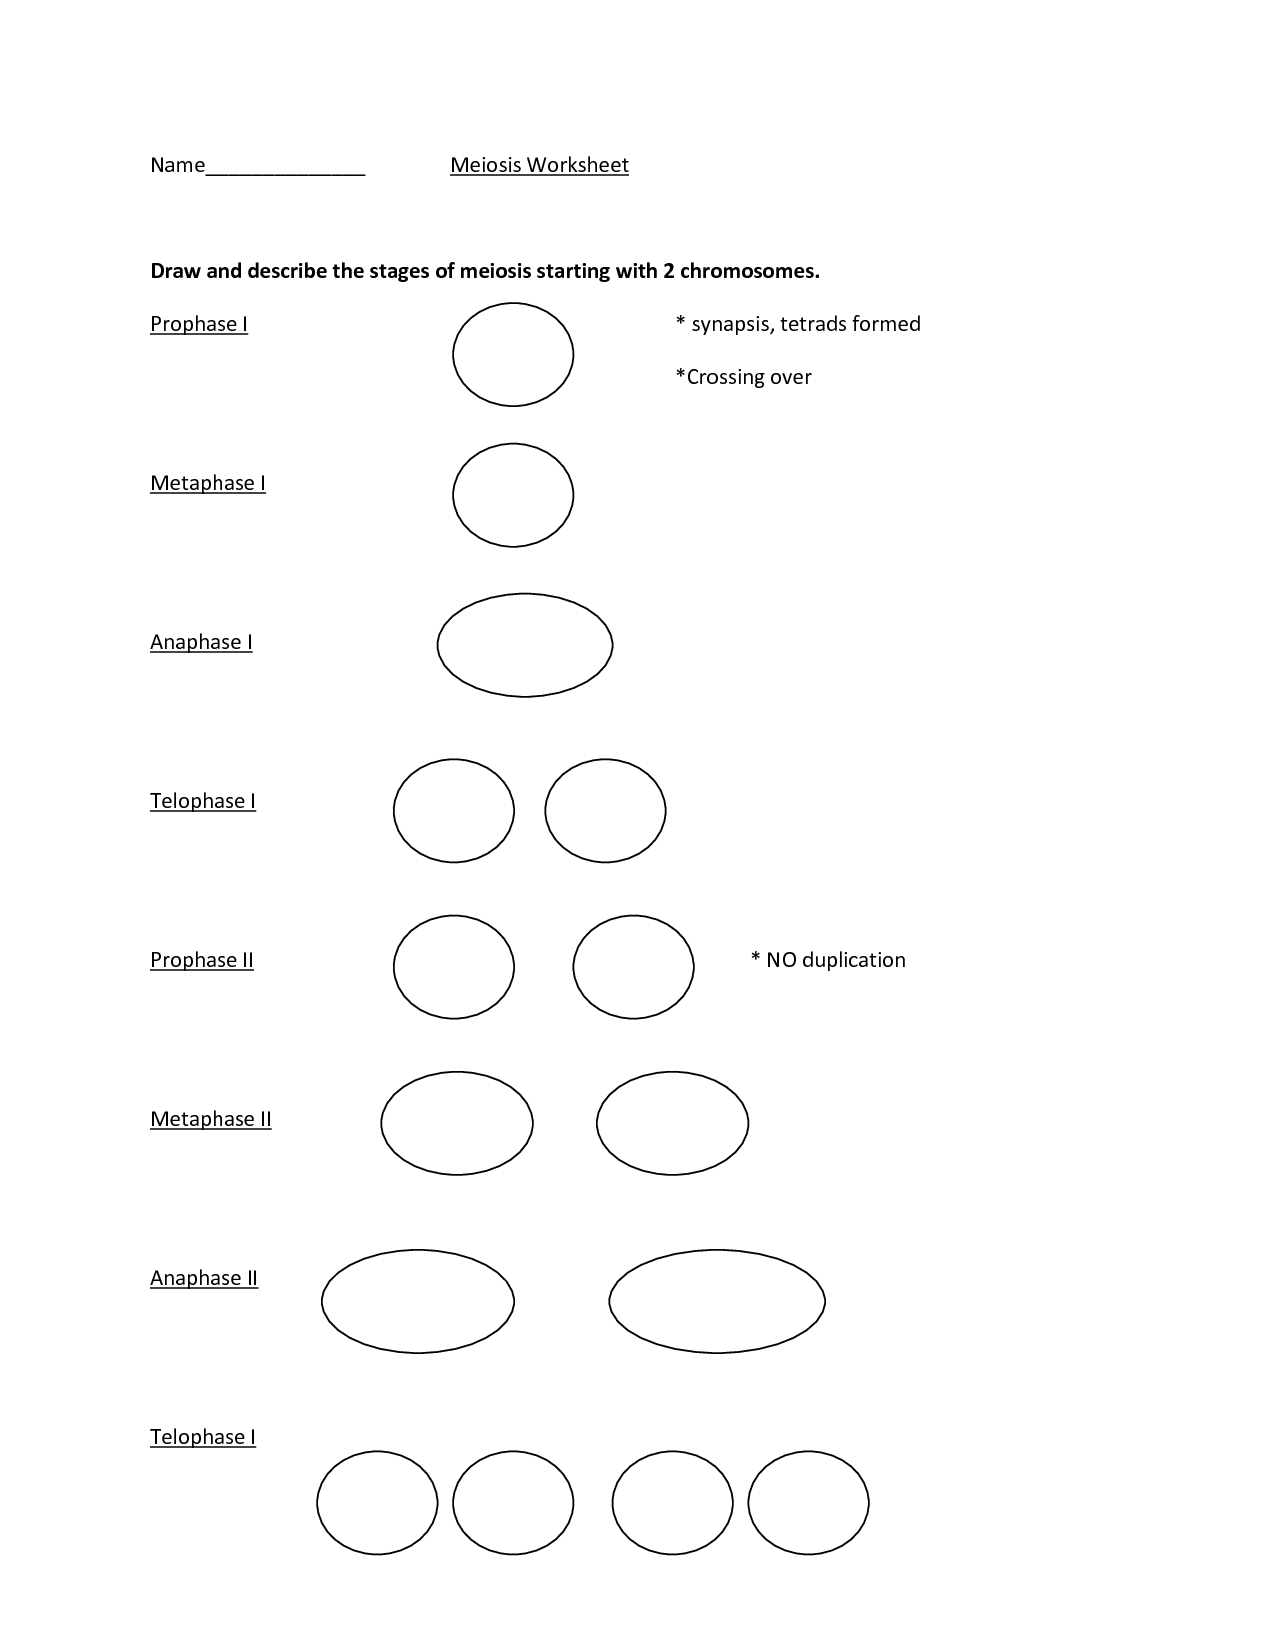 16-best-images-of-steps-of-meiosis-worksheet-answers-meiosis-stages